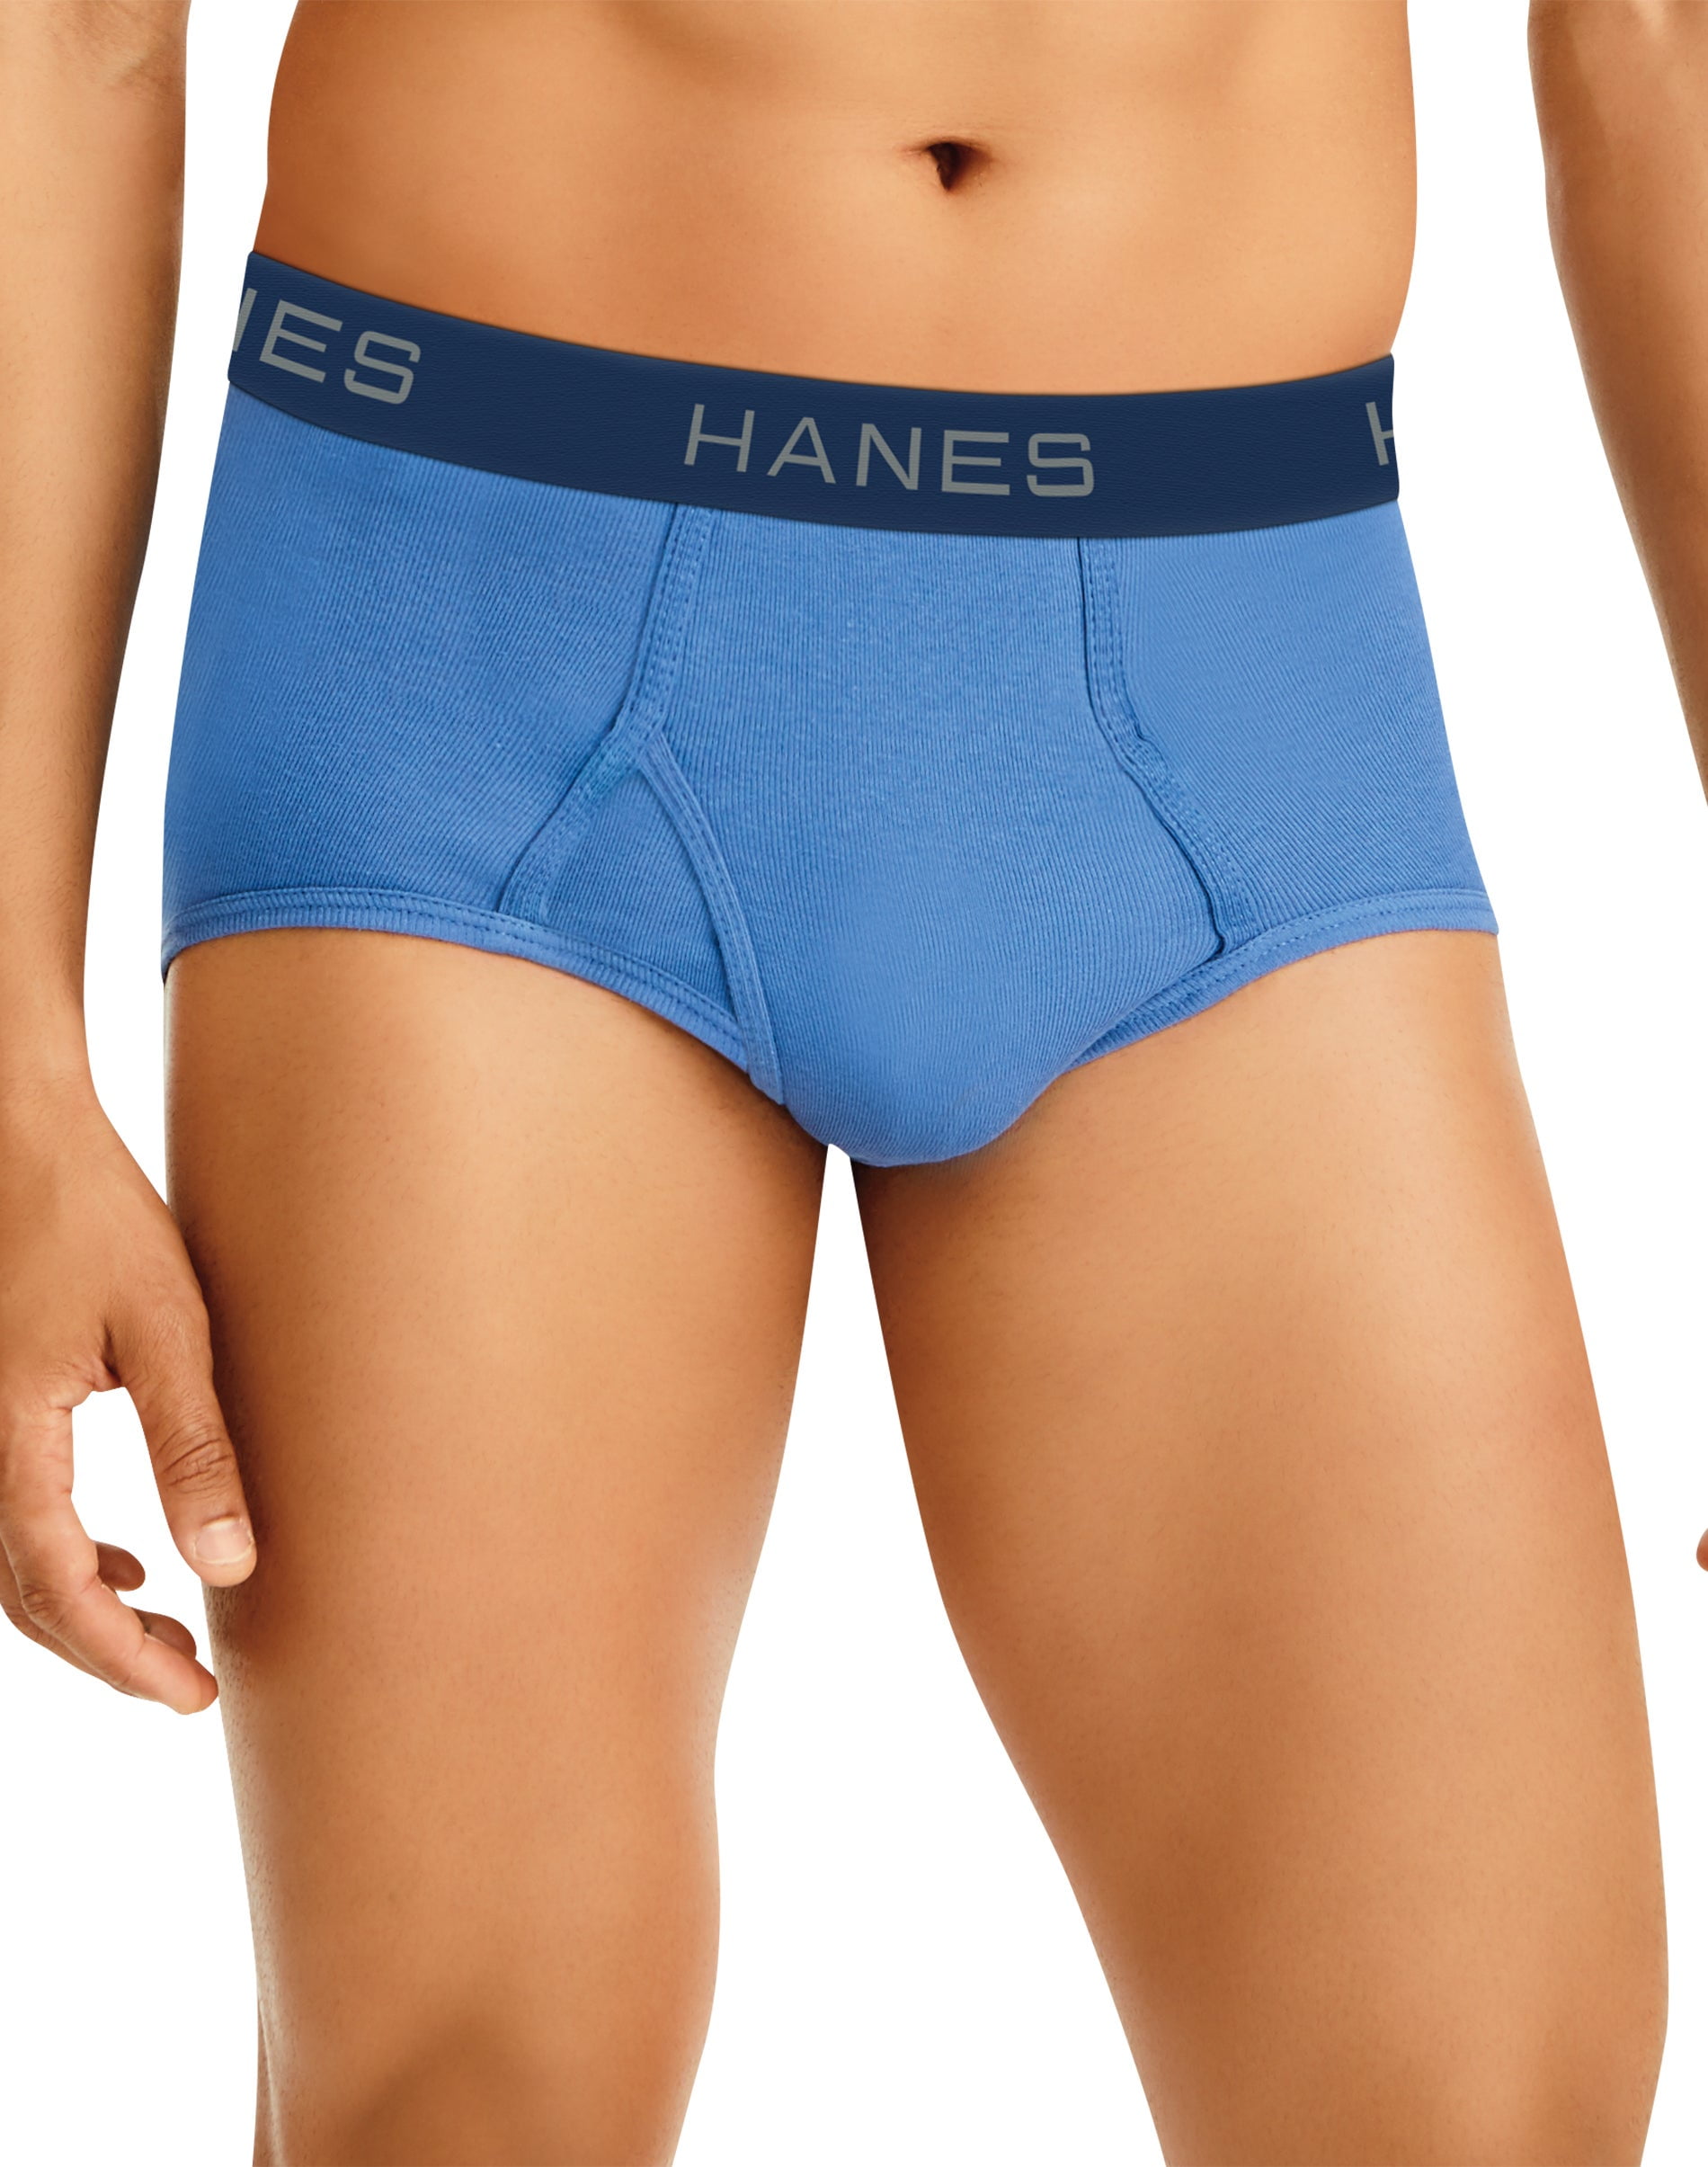 Hanes Ultimate Men's Brief Underwear Pack, Full-Rise, Moisture-Wicking  Cotton, Blue Assorted/White, 7-Pack L